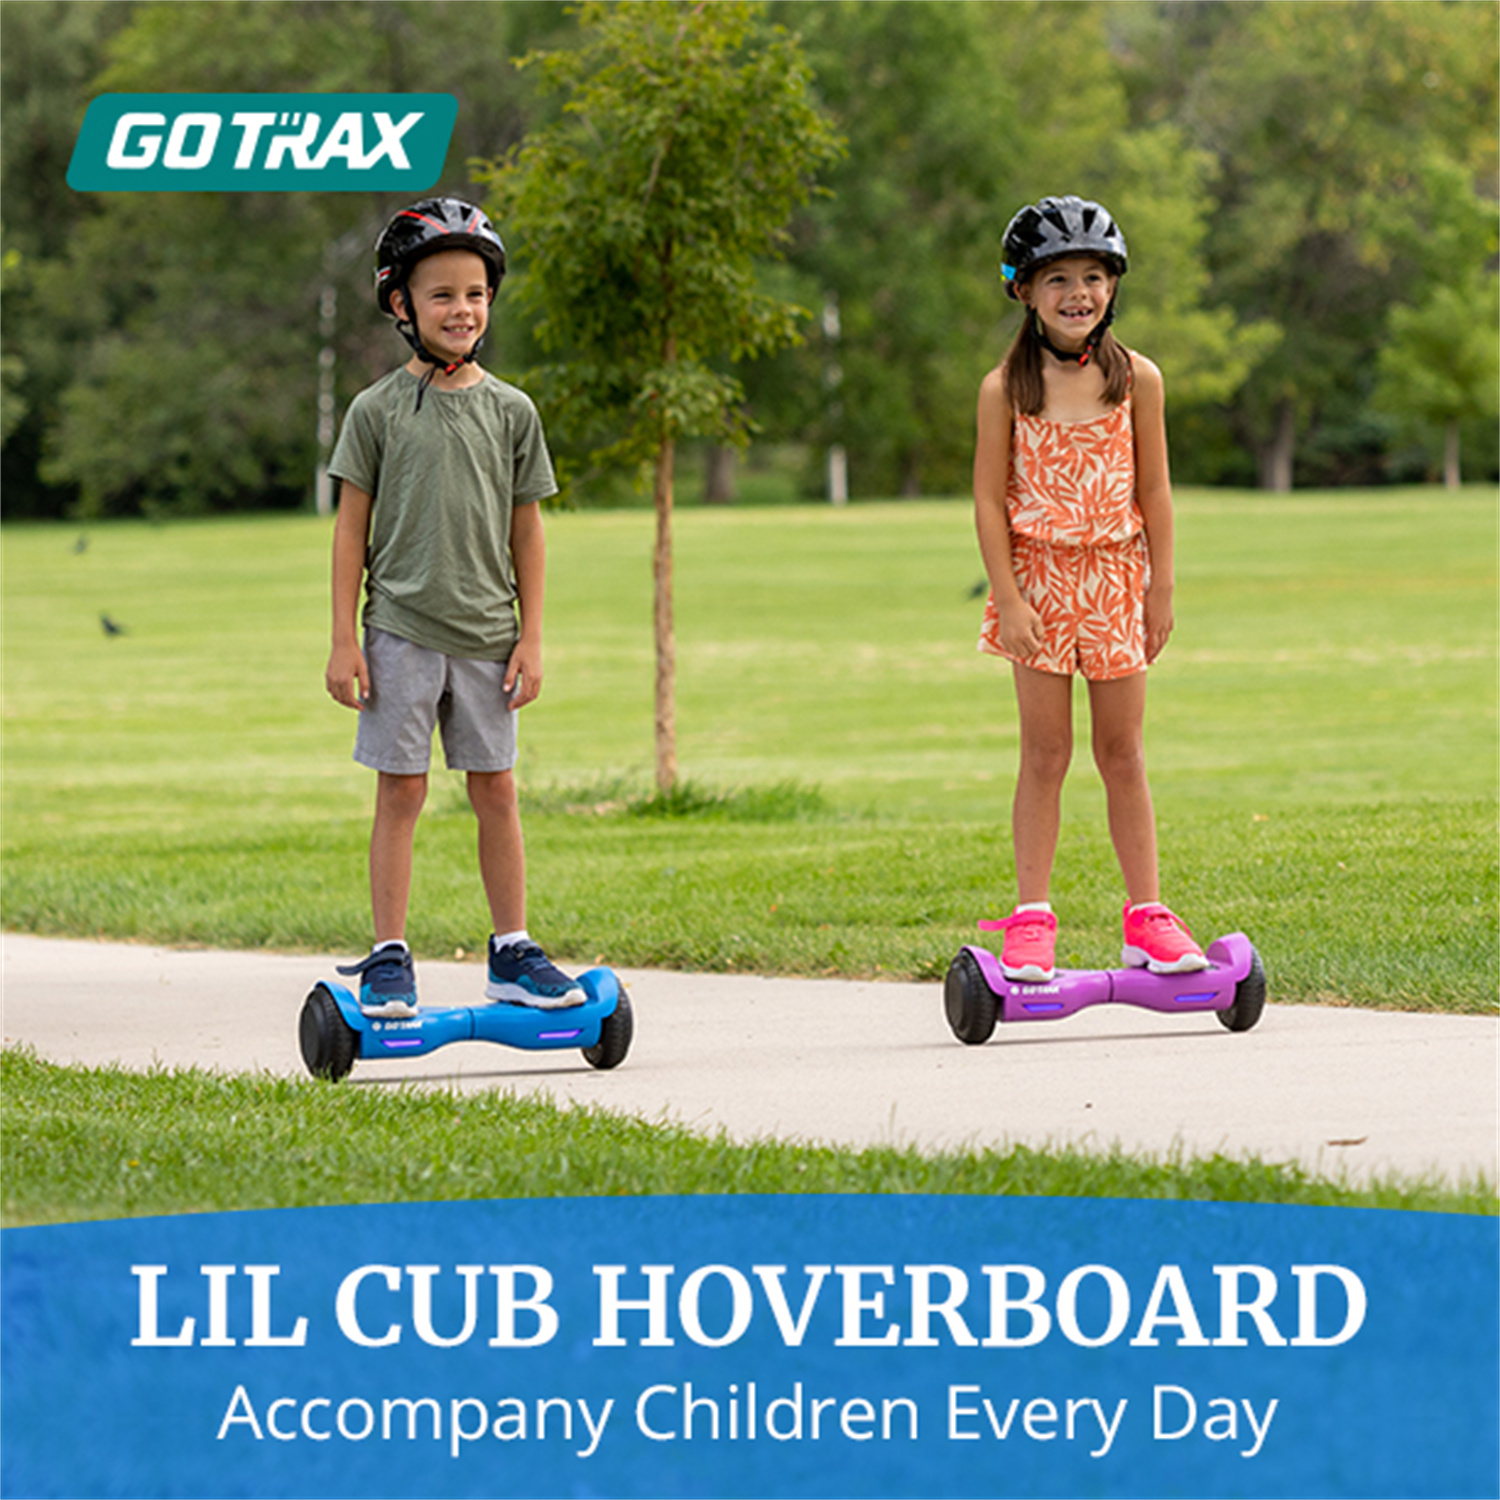 GOTRAX Lil Cub Hoverboard 6.5" Wheels, Max 2.5 Miles, 6.2mph Self Balance for 44-88lbs Kids, Purple - image 3 of 11